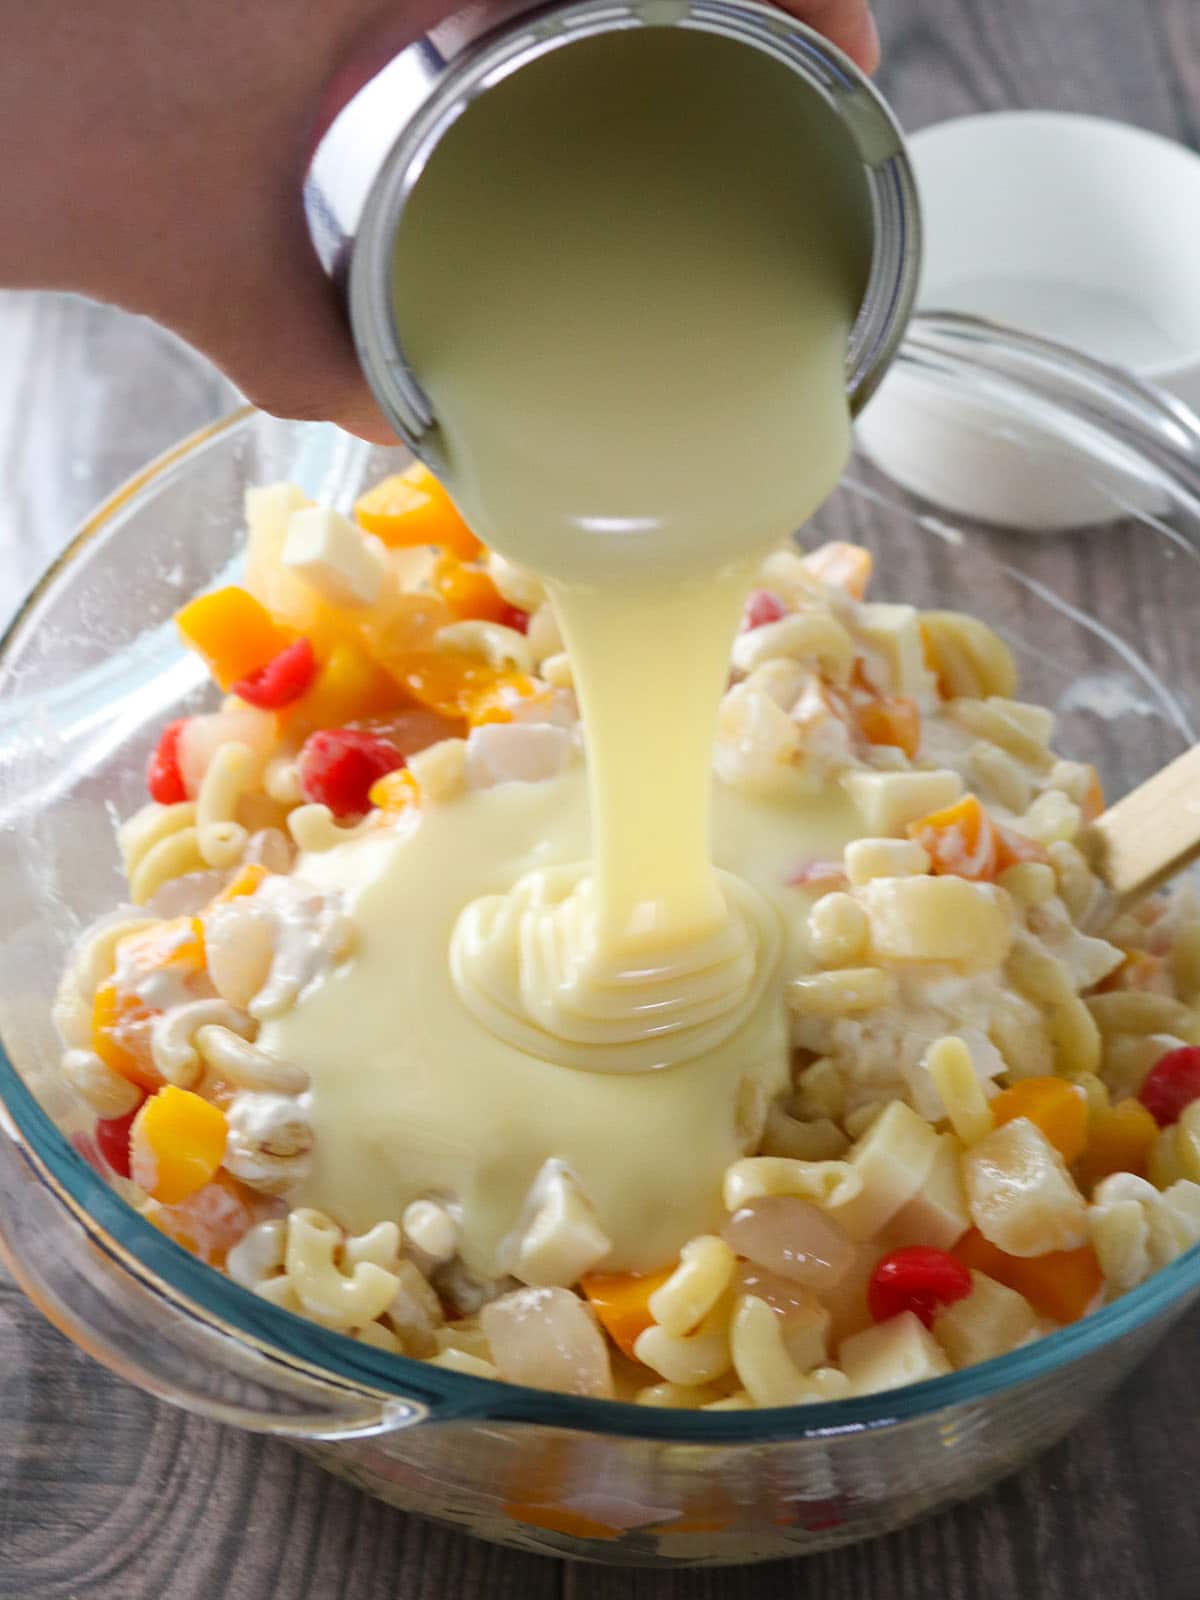 pouring condensed milk on fruit salad with macaroni in a glass bowl